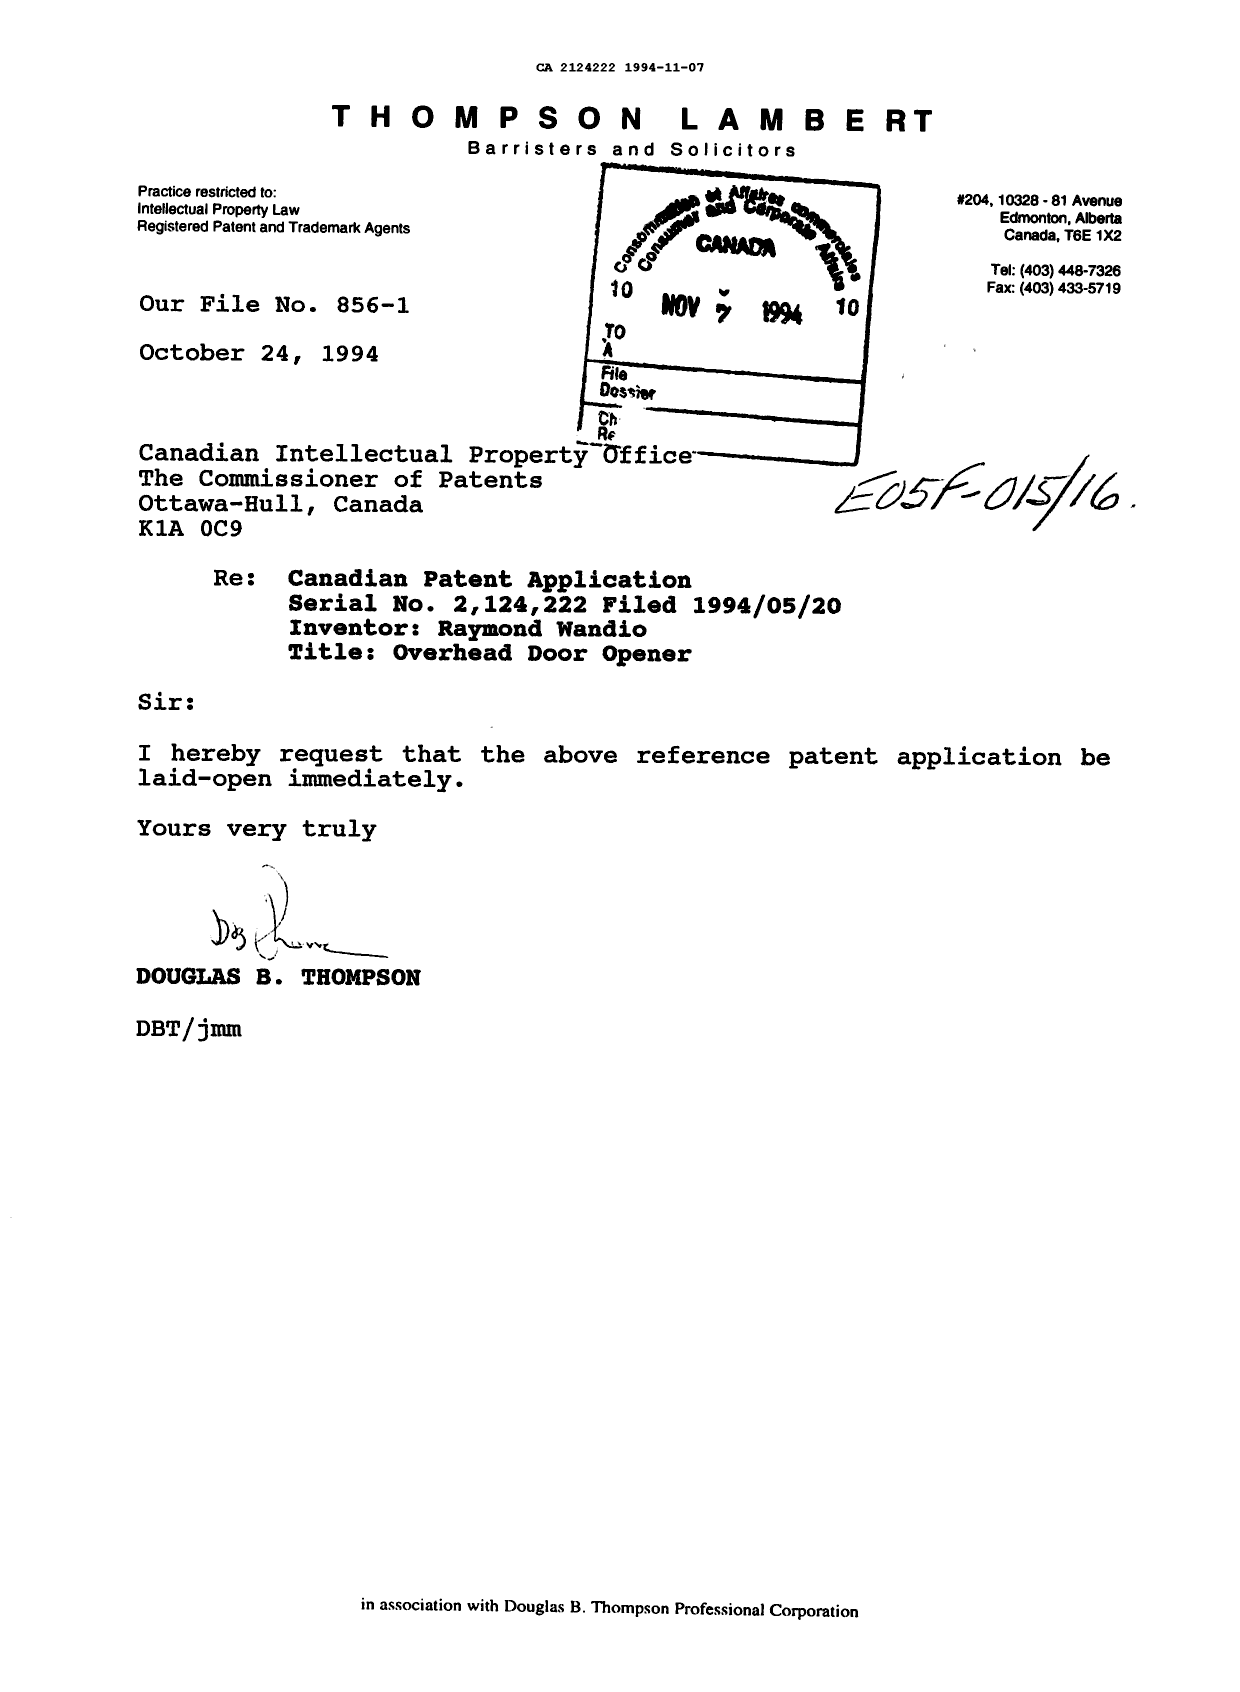 Canadian Patent Document 2124222. Correspondence Related to Formalities 19941107. Image 1 of 1